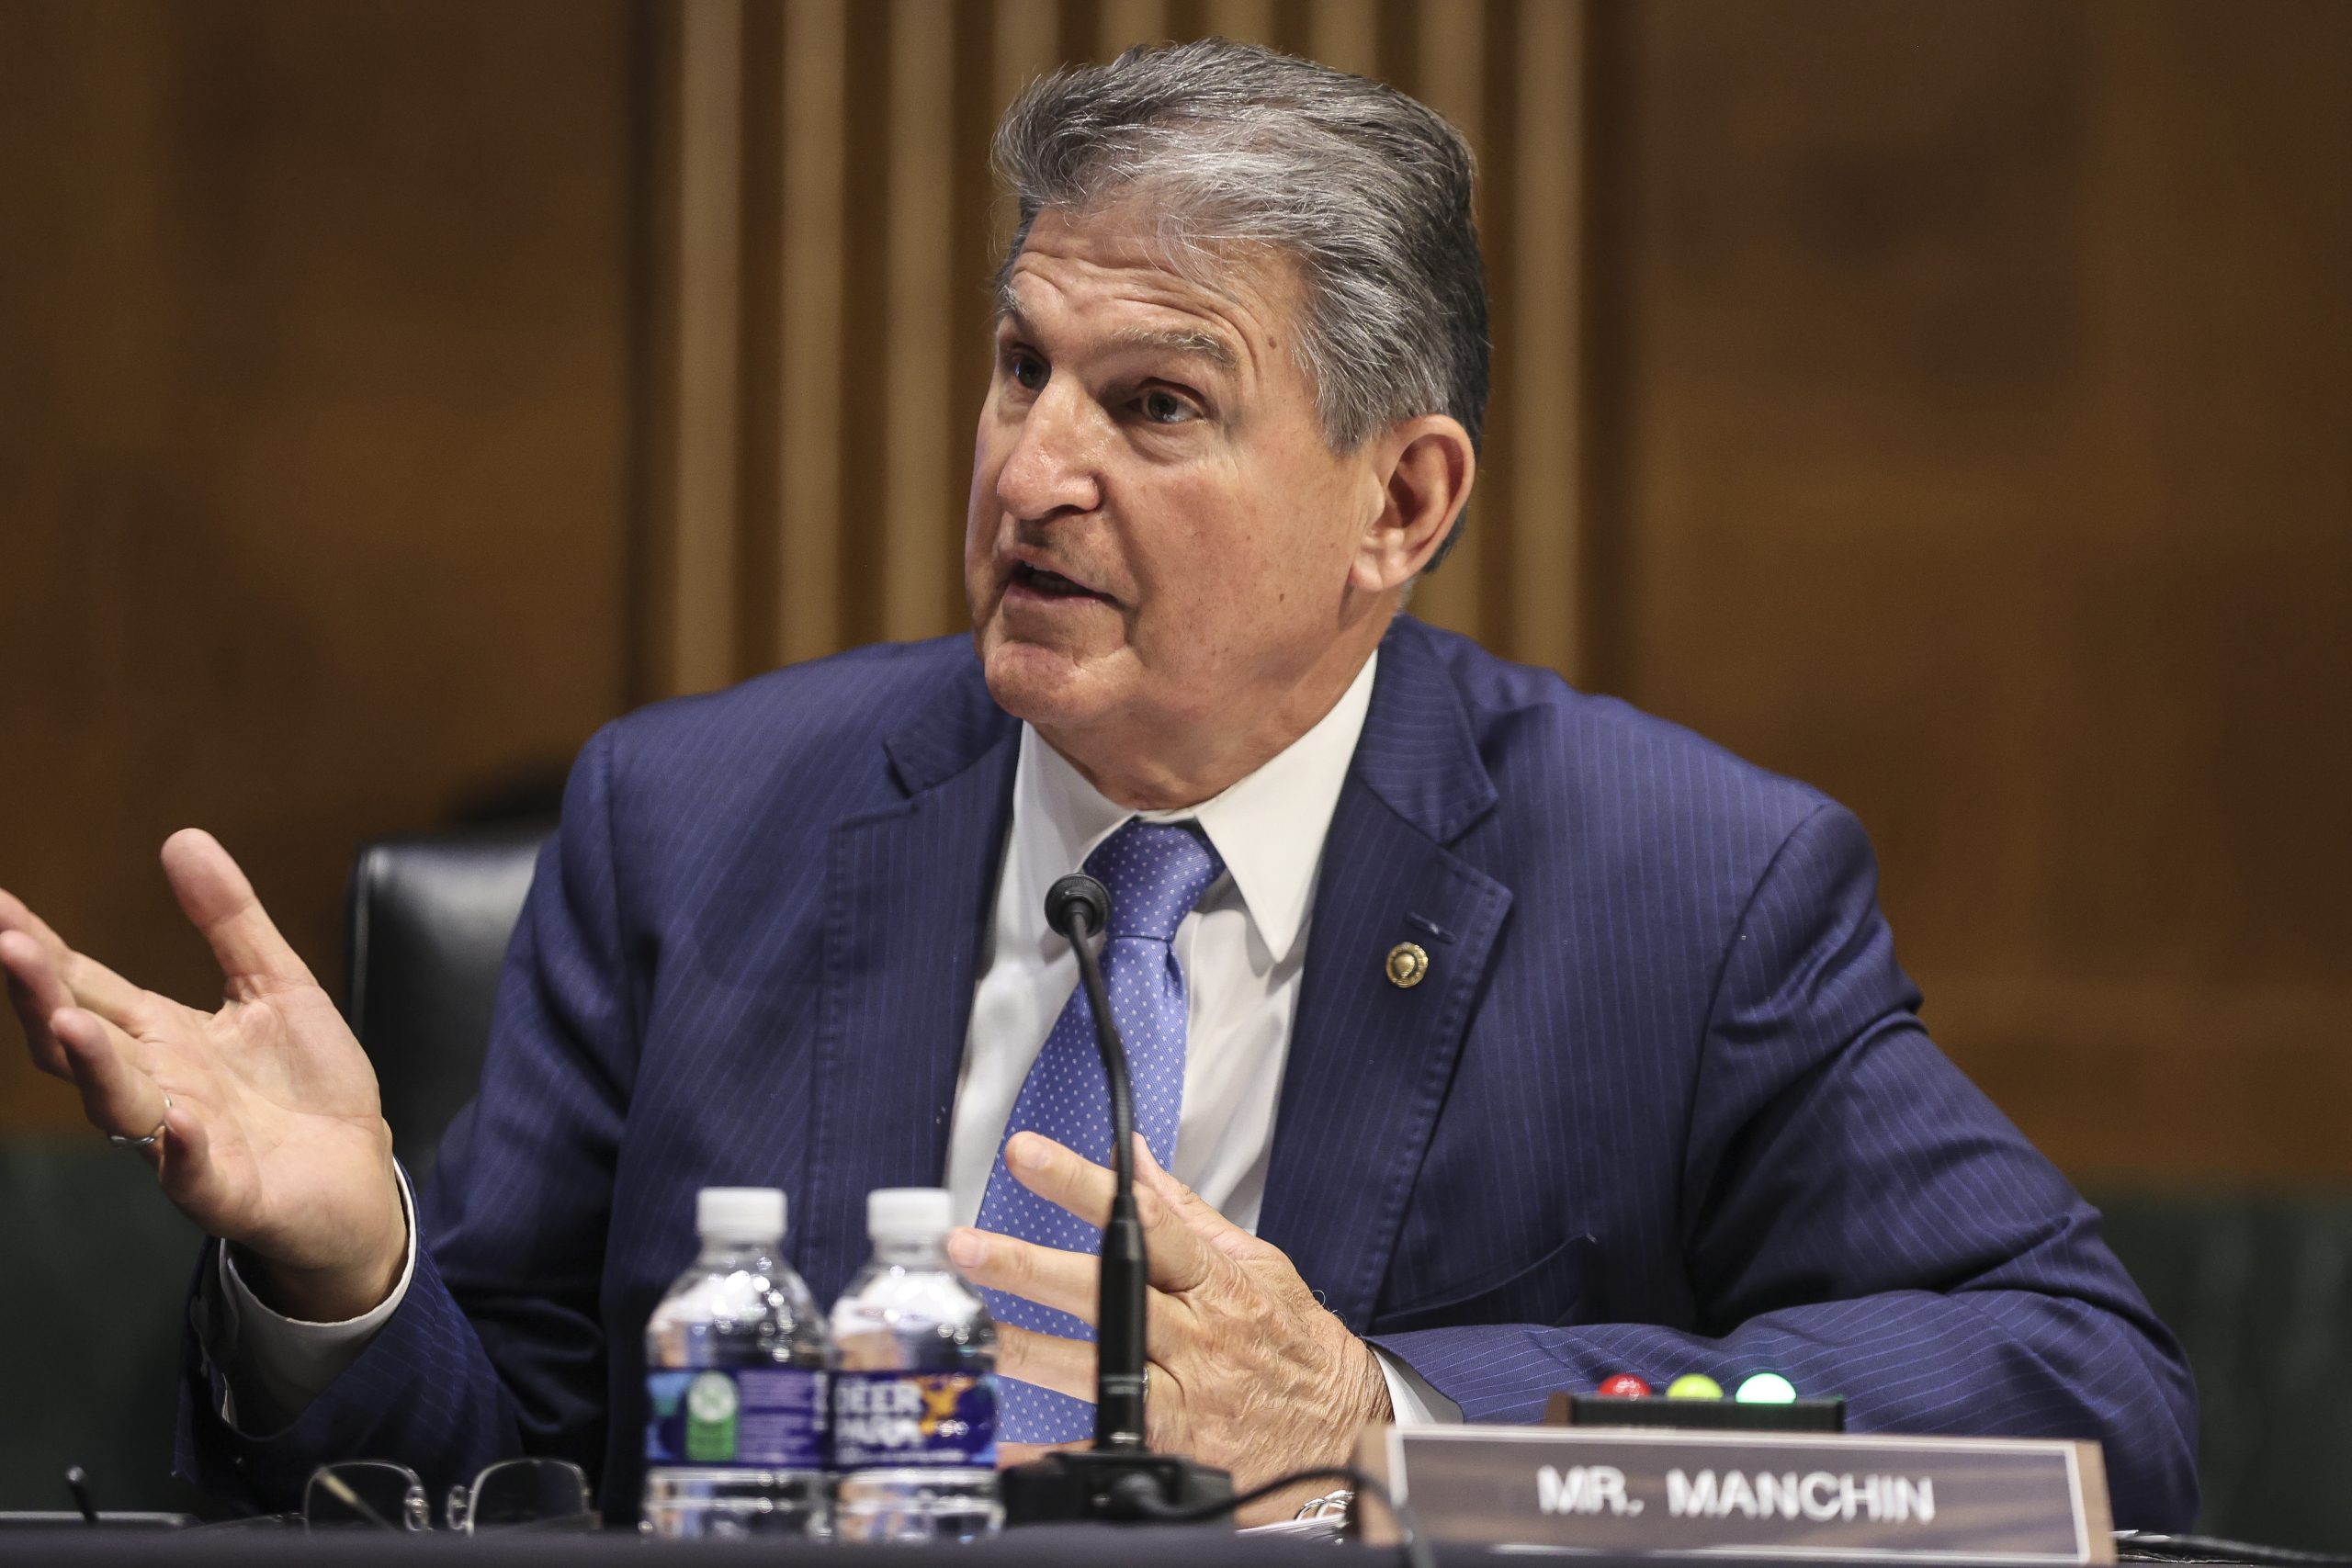 Manchin’s climate rebuff adds to Congress’ troubled track record